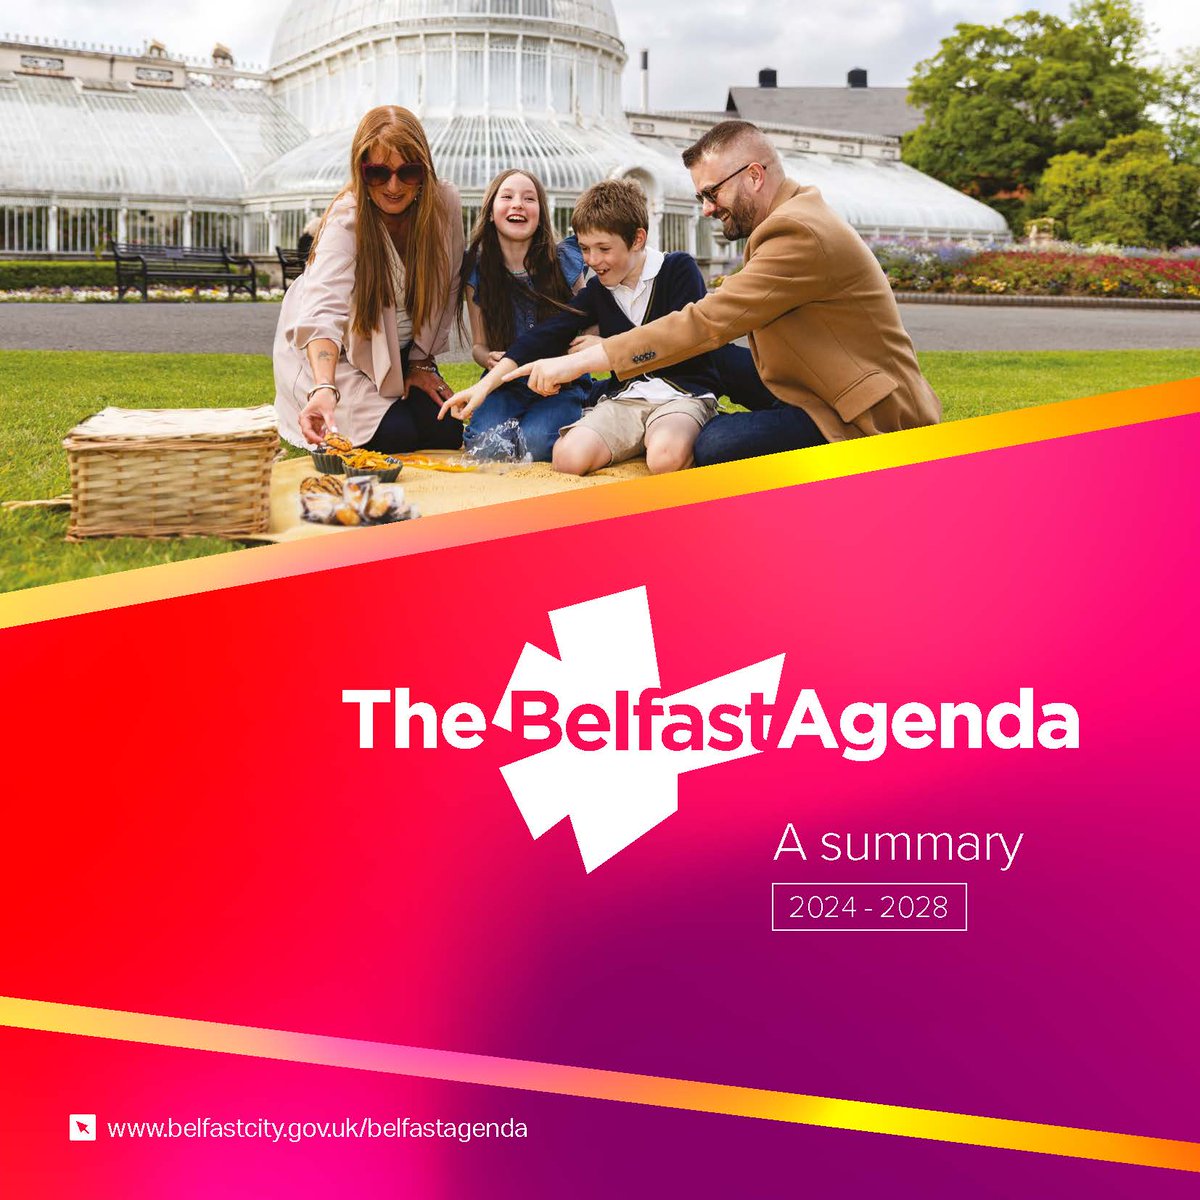 We are proud to have contributed to the the Belfast Agenda for the period 2024-2028 creating collaborative approaches to improving the health and wellbeing of citizens across the city. Find out more about the #BefastAgenda on the @belfastcc website belfastcity.gov.uk/belfastagenda